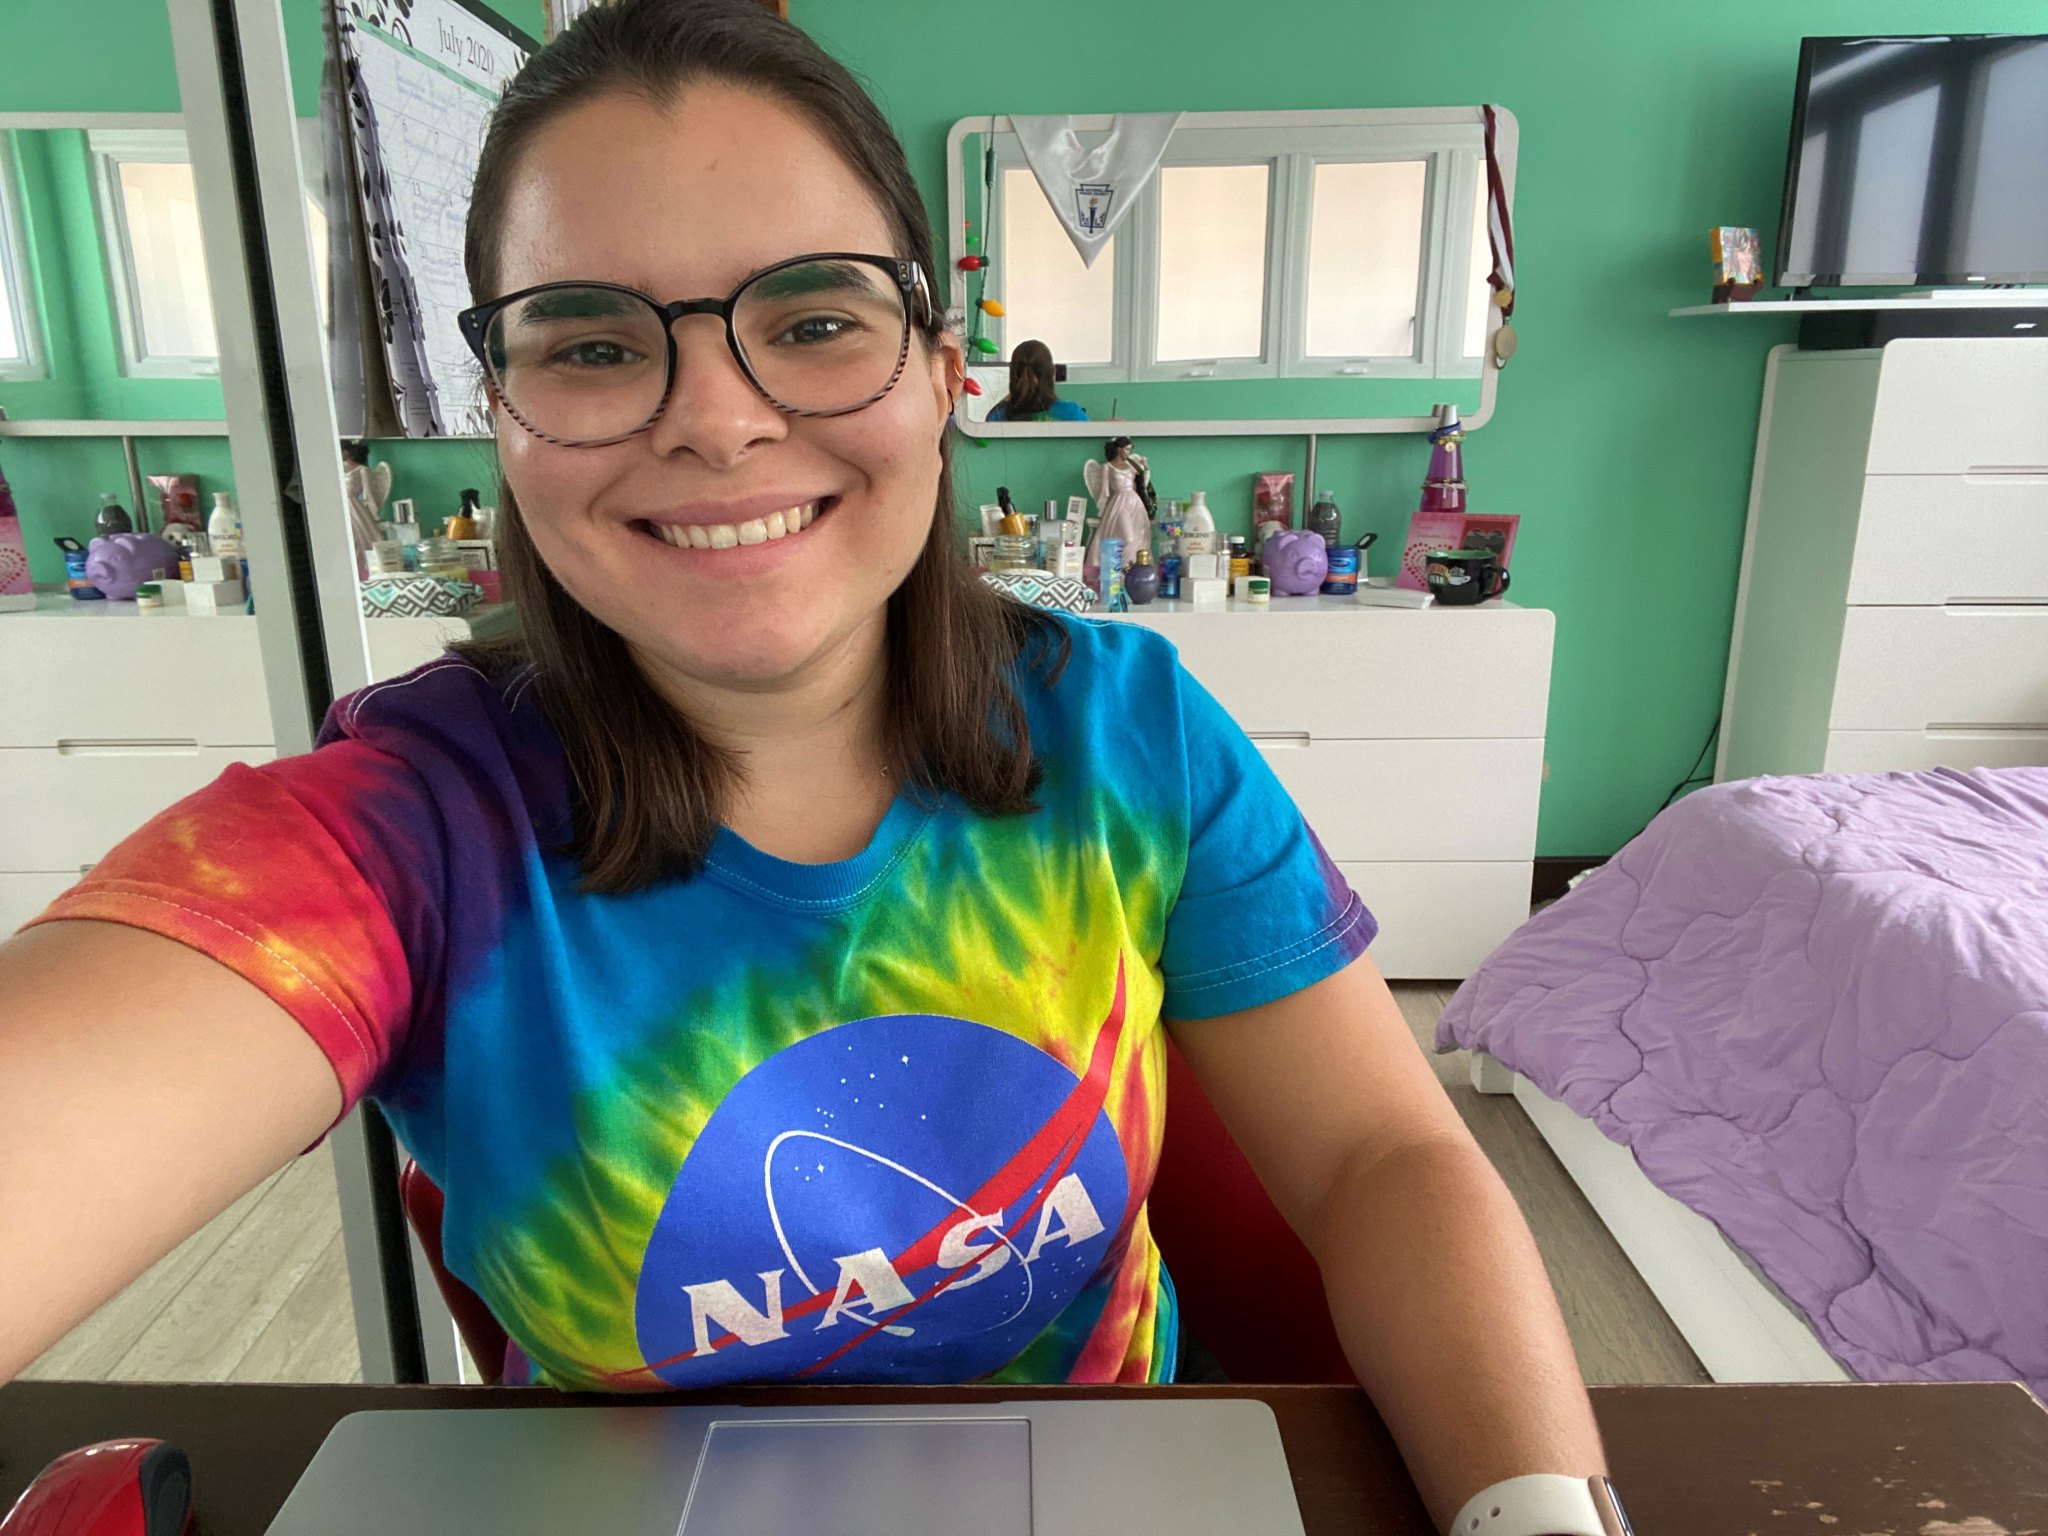 Female college student wearing a brightly colored NASA t-shirt smiling toward the viewer.